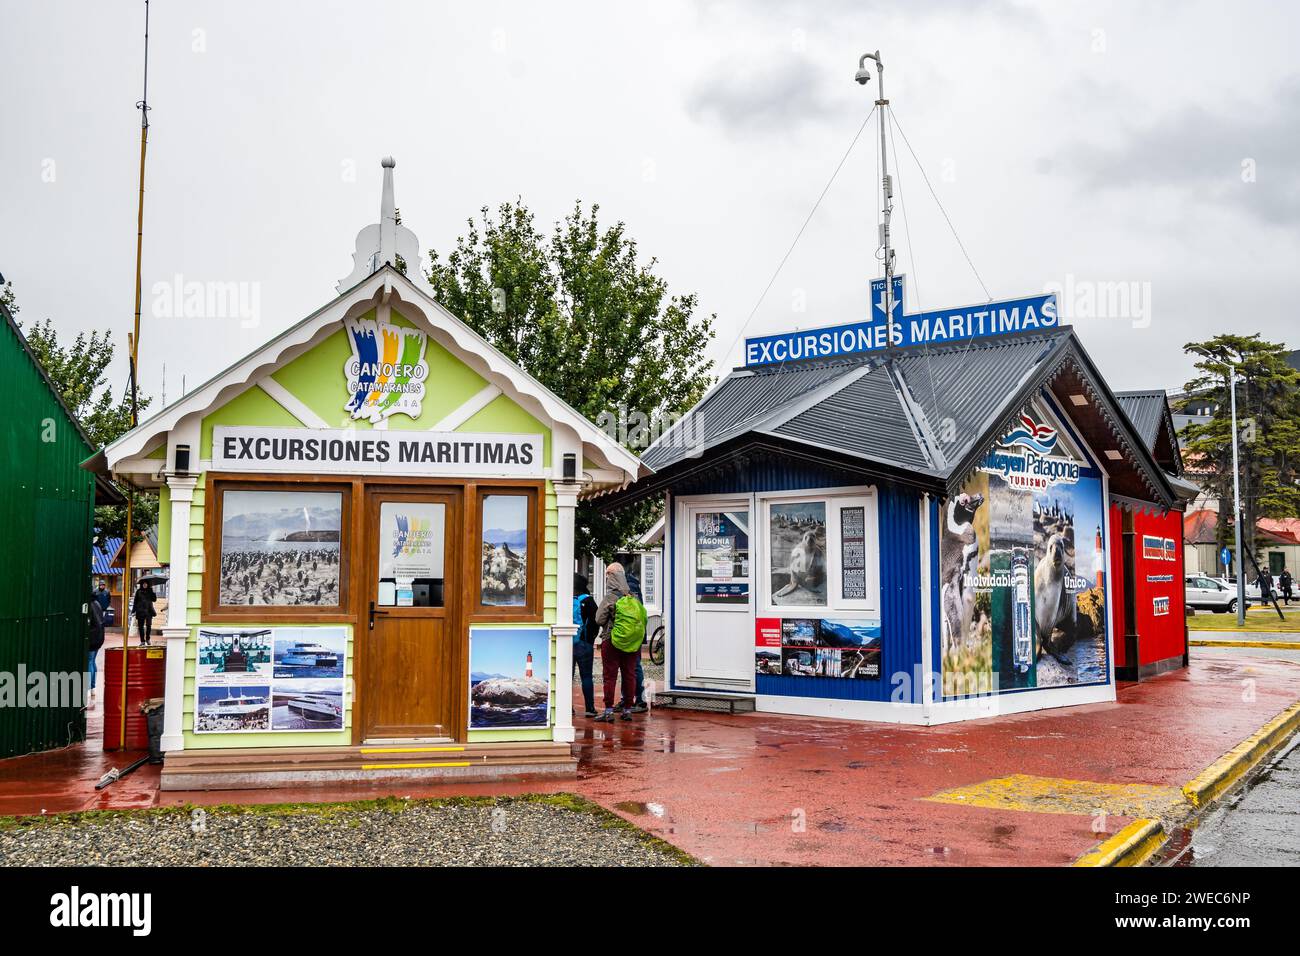 Small sheds along the street of Puerto Willams selling land excursions to to tourists and cruise ship passengers. Ushuaia, Argentina. Stock Photo